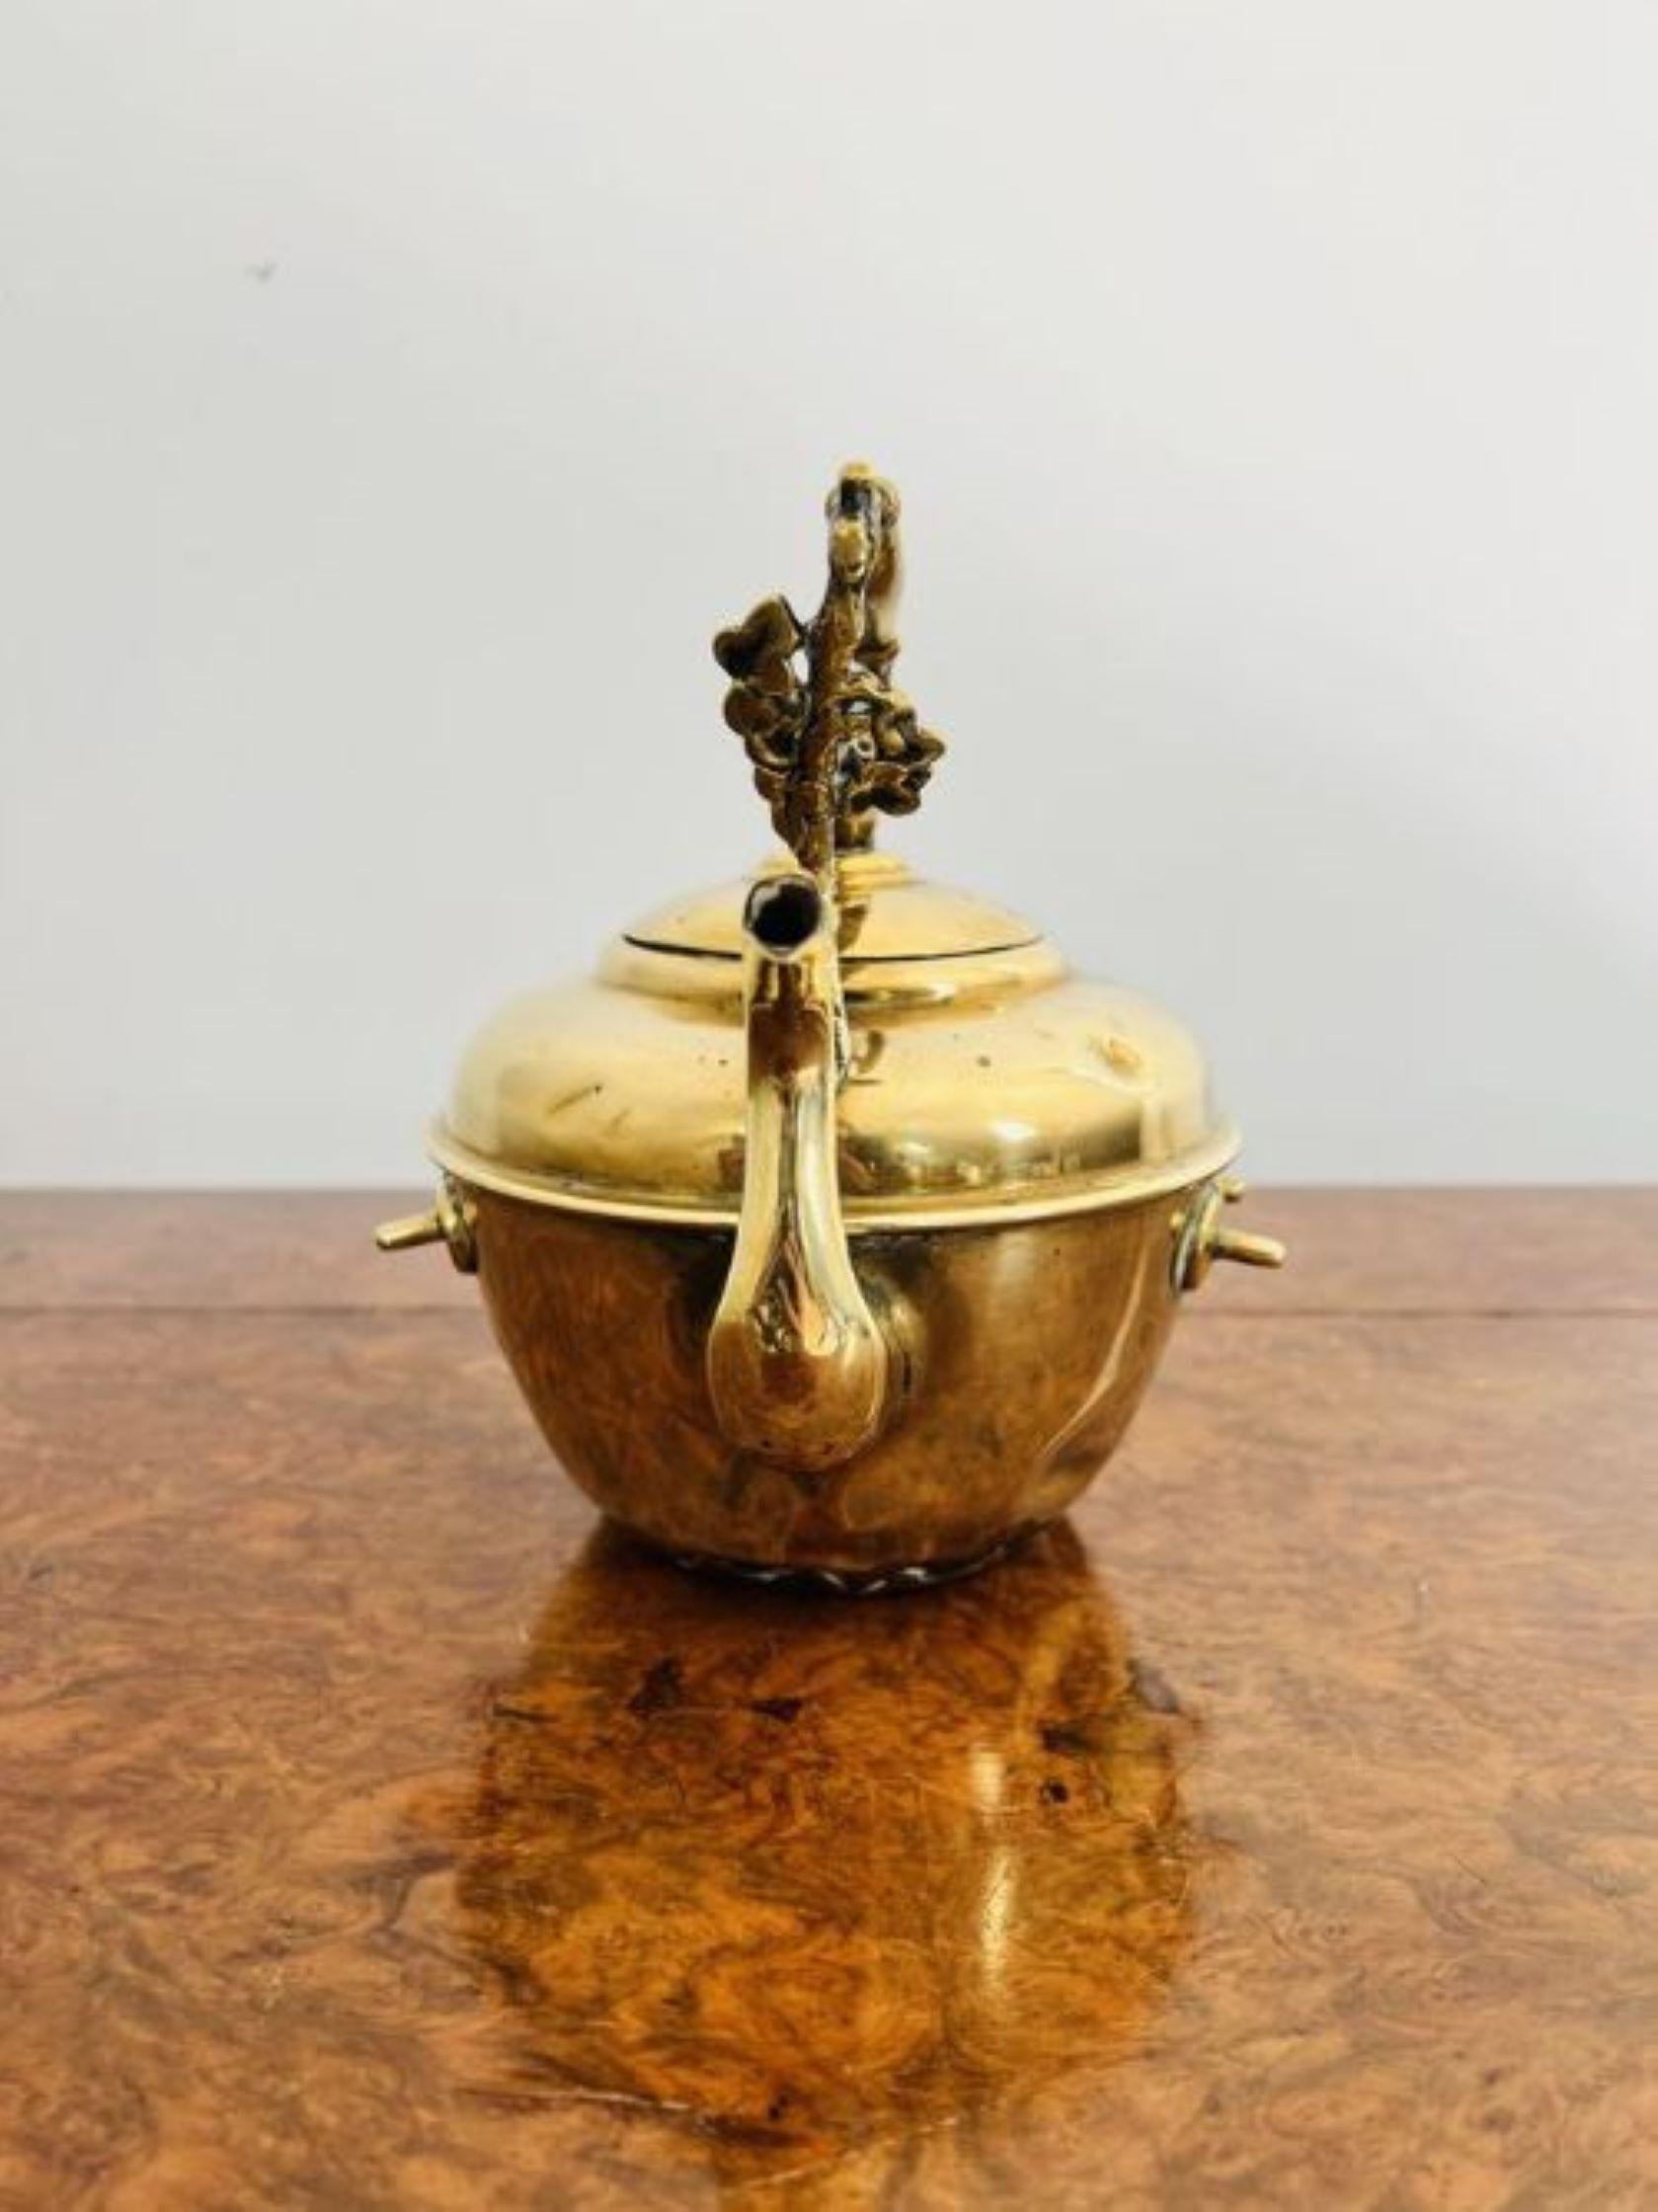 Antique Victorian quality brass spirit kettle and stand having a quality ornate brass kettle on the original ornate brass stand with the original burner.